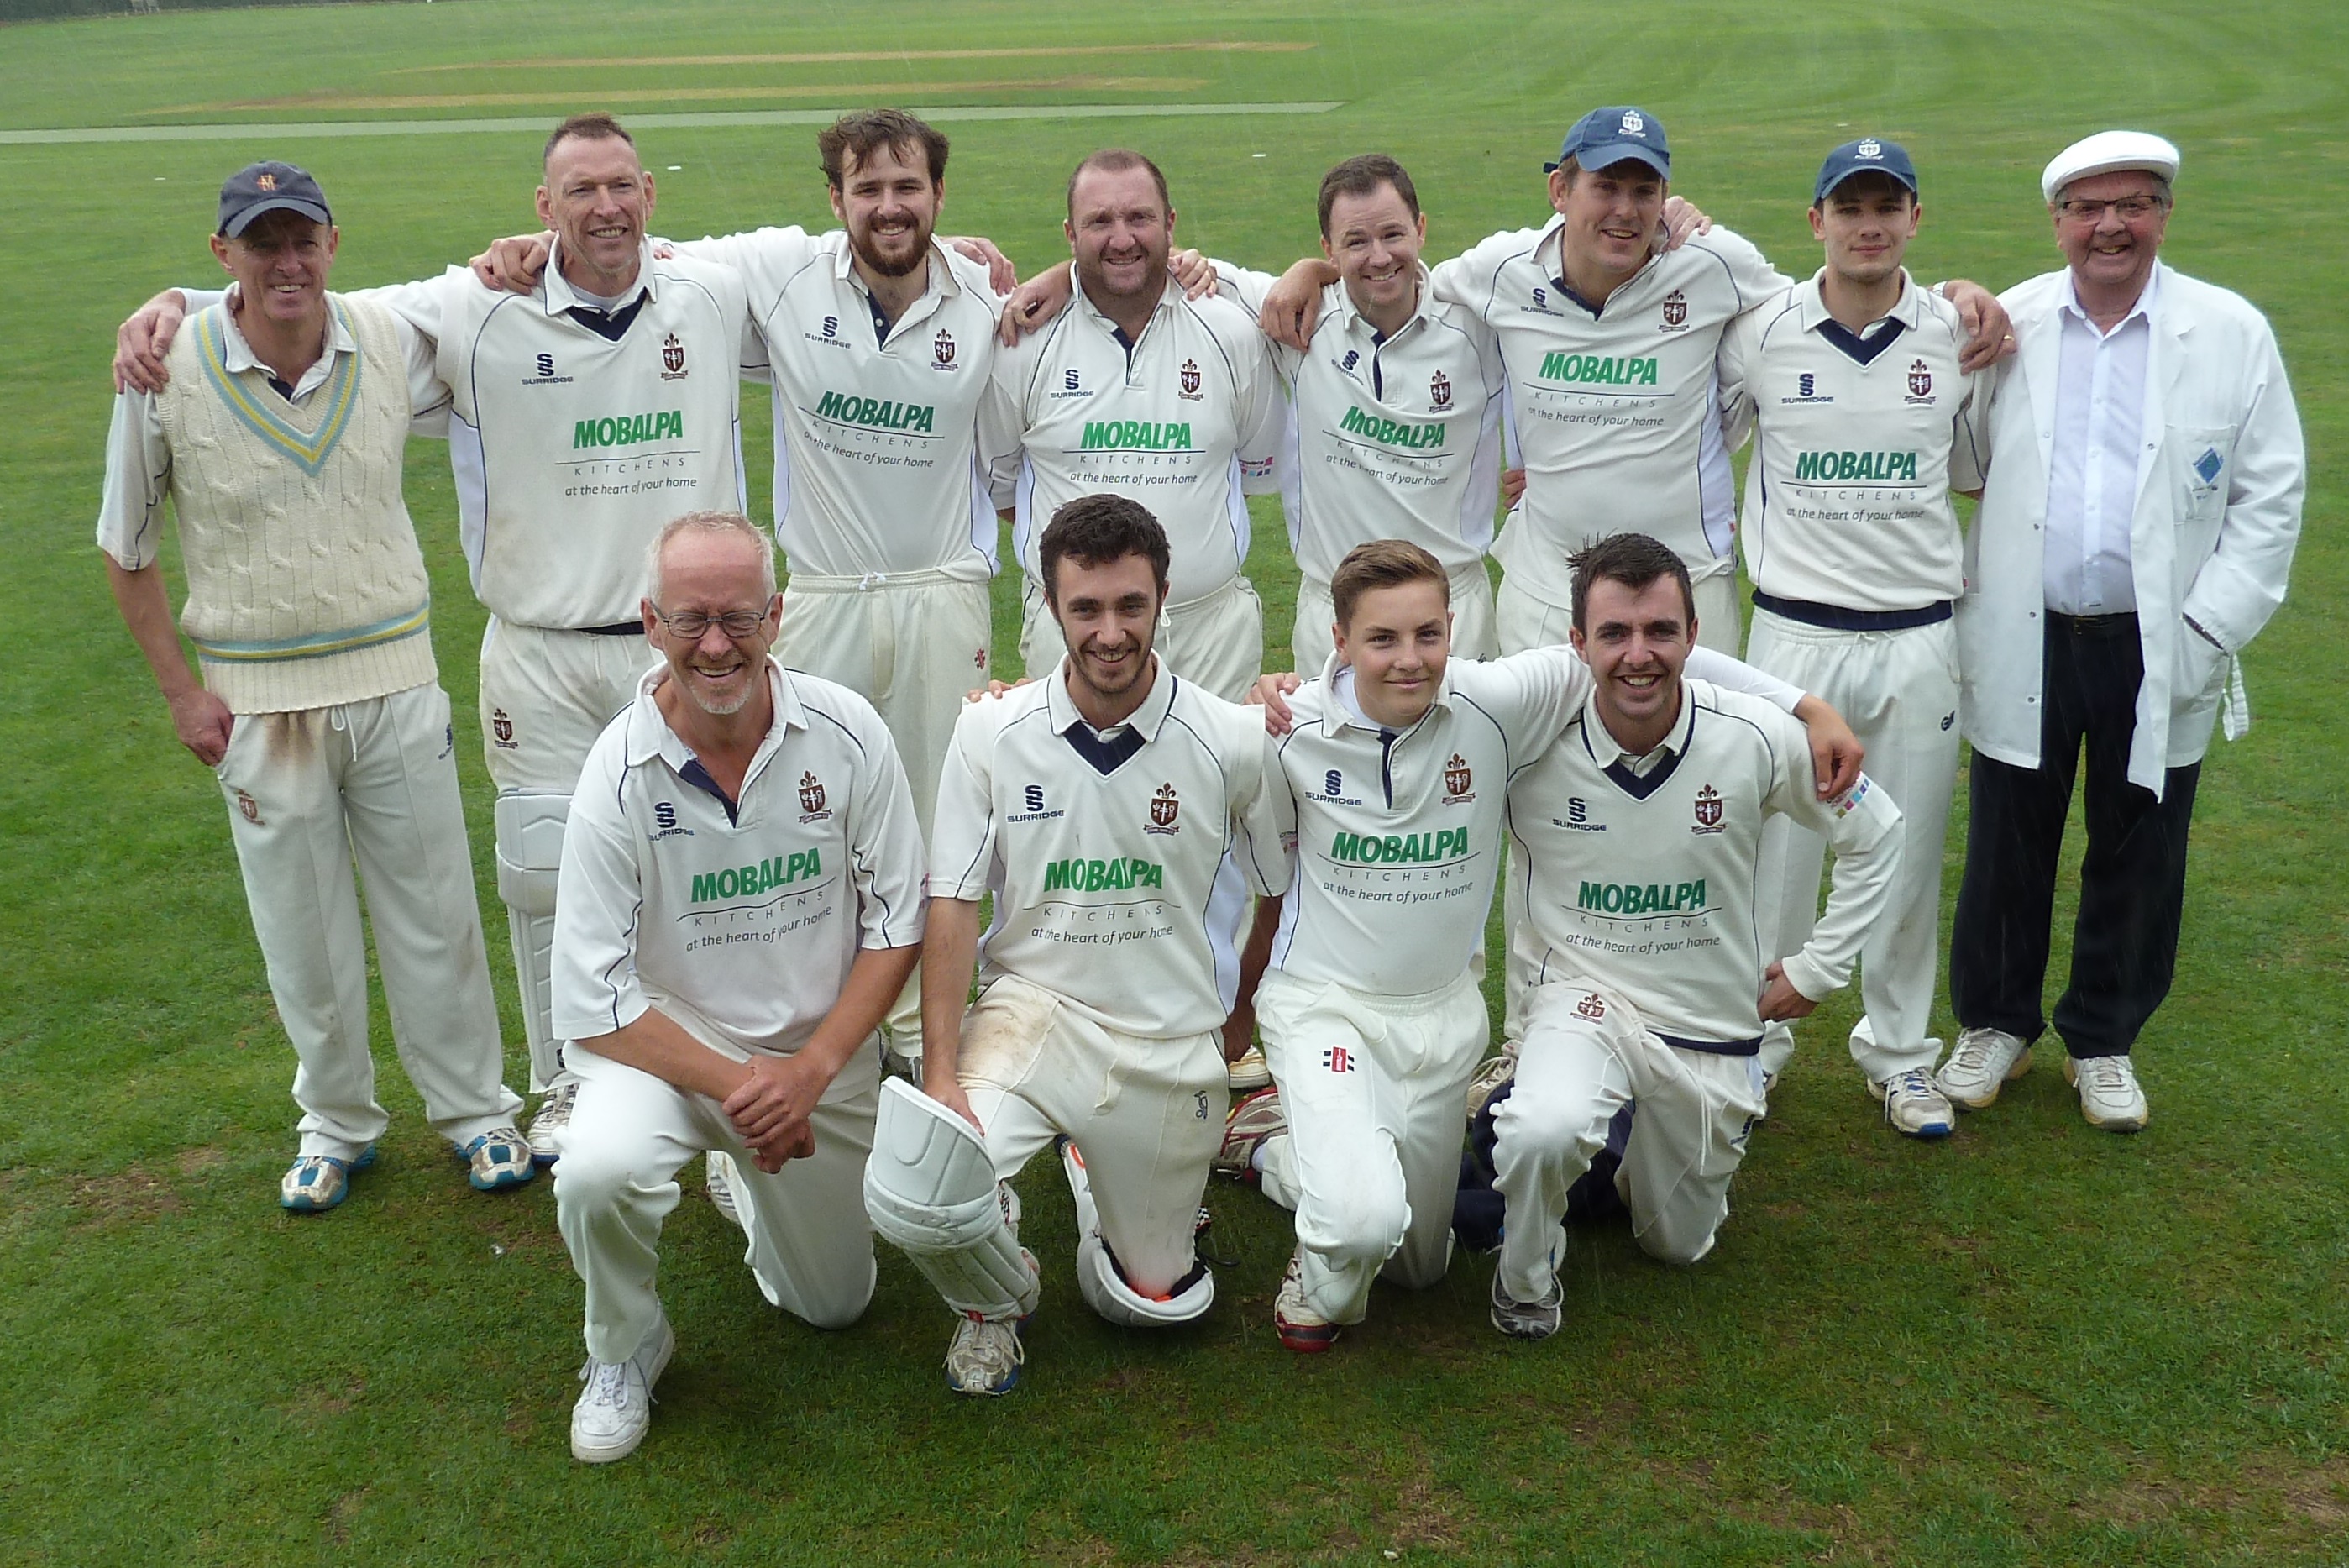 Thame 2nd XI - Division 5 champions 2016